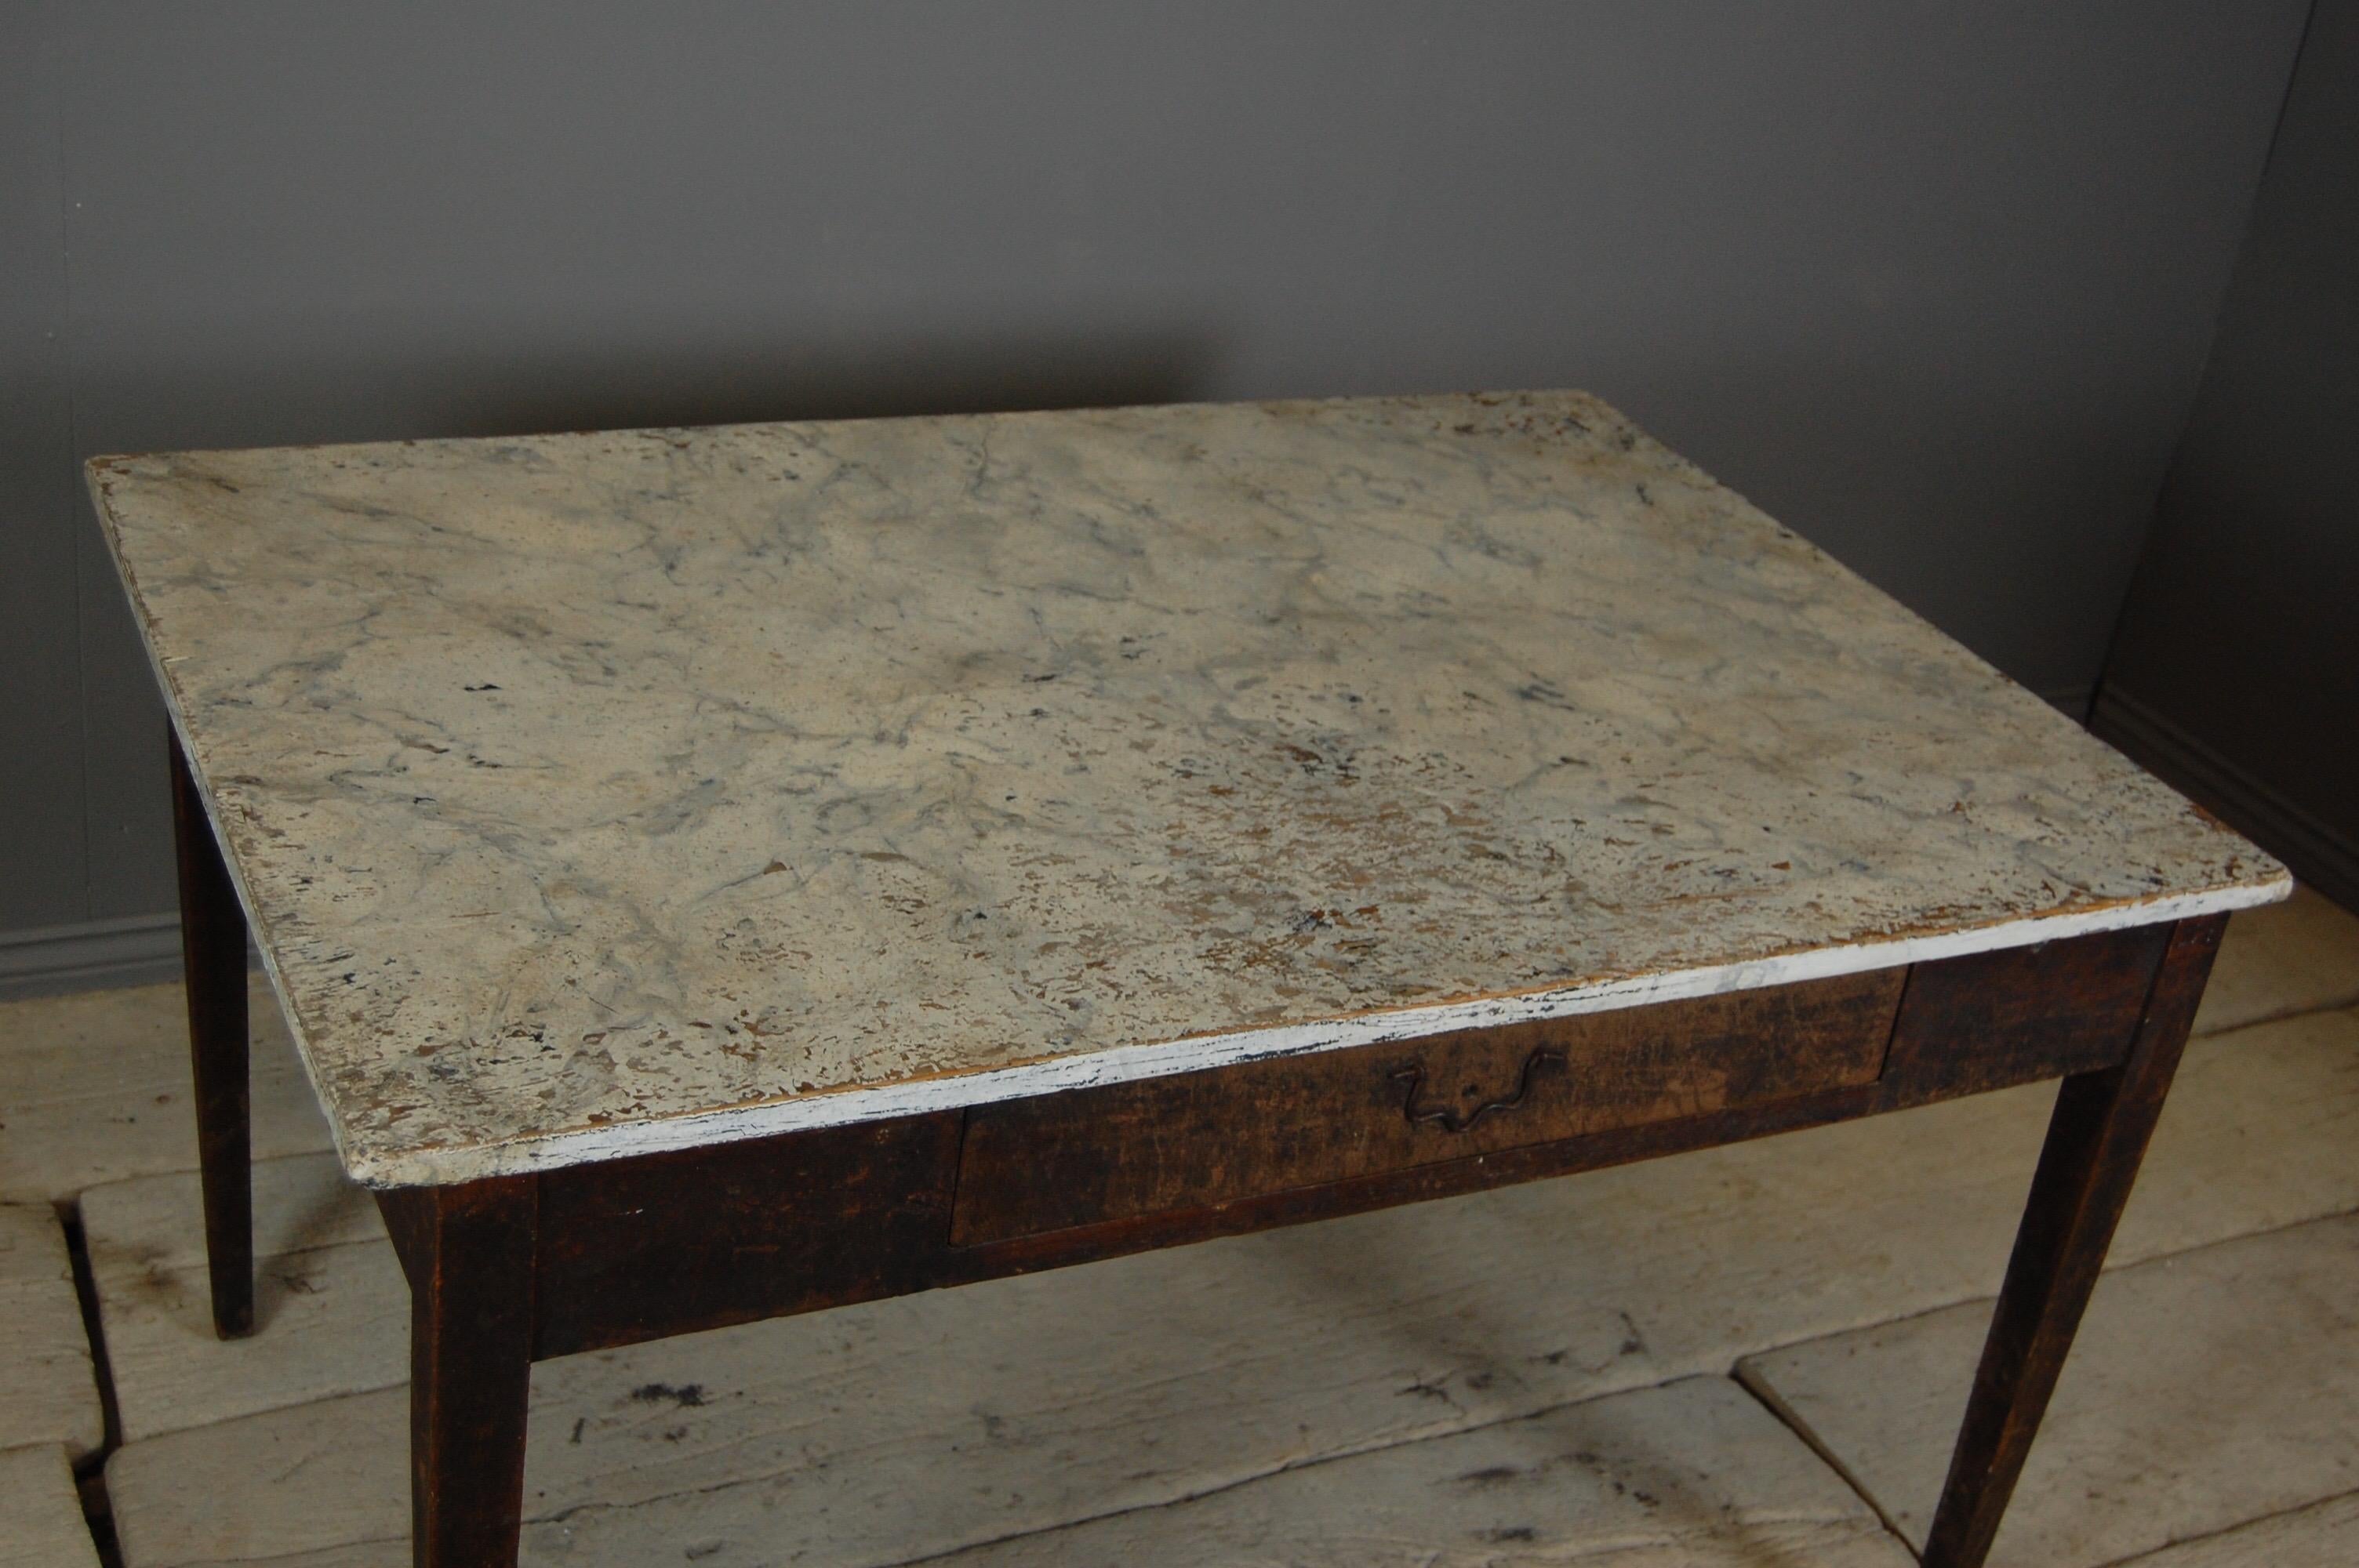 19th century Swedish vernacular Gustavian style writing desk, painted faux marble top with lots of wear.
Dimensions: 120cm x 72cm x 83cm.